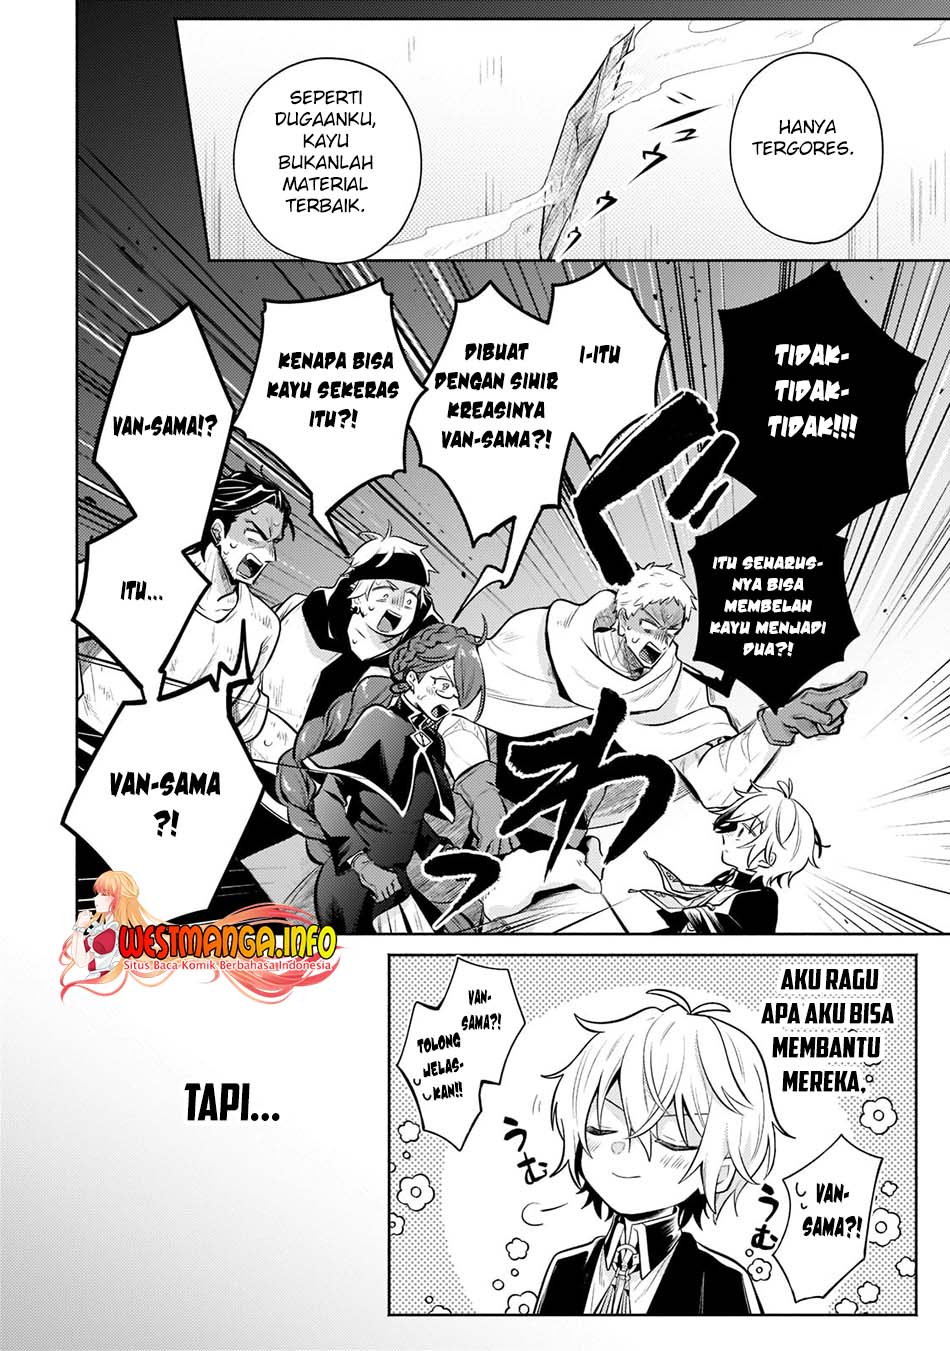 Fun Territory Defense Of The Easy-Going Lord ~The Nameless Village Is Made Into The Strongest Fortified City By Production Magic~ Chapter 09 - 195